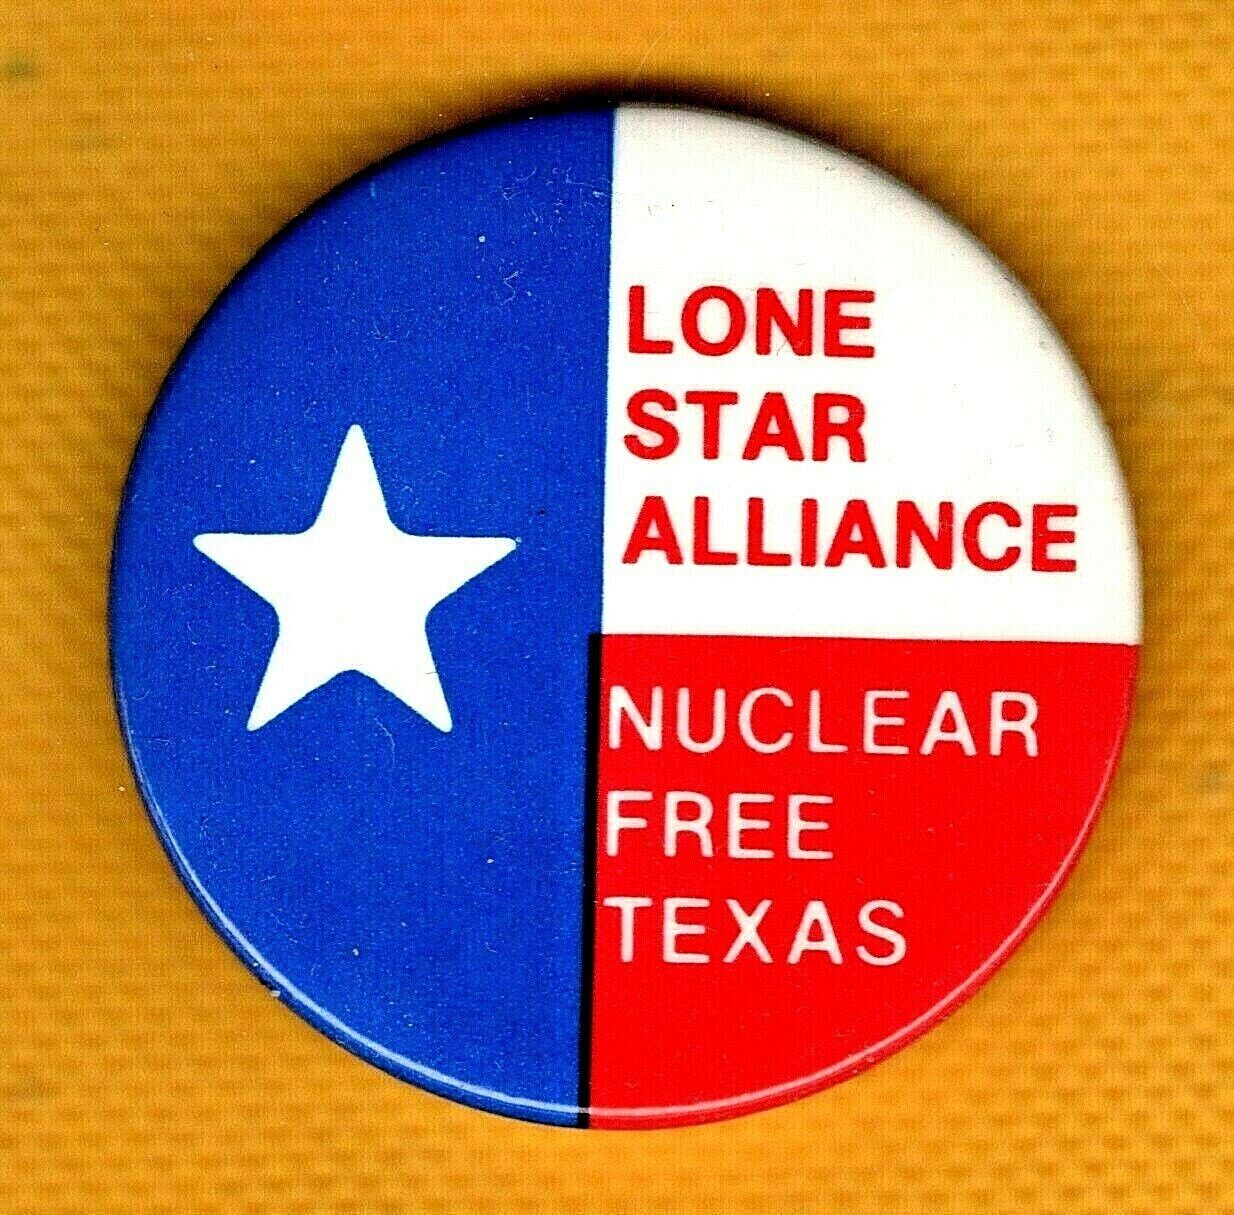 NUCLEAR FREE TEXAS - LONE STAR ALLIANCE -  1983 Nuclear Power Protest Button